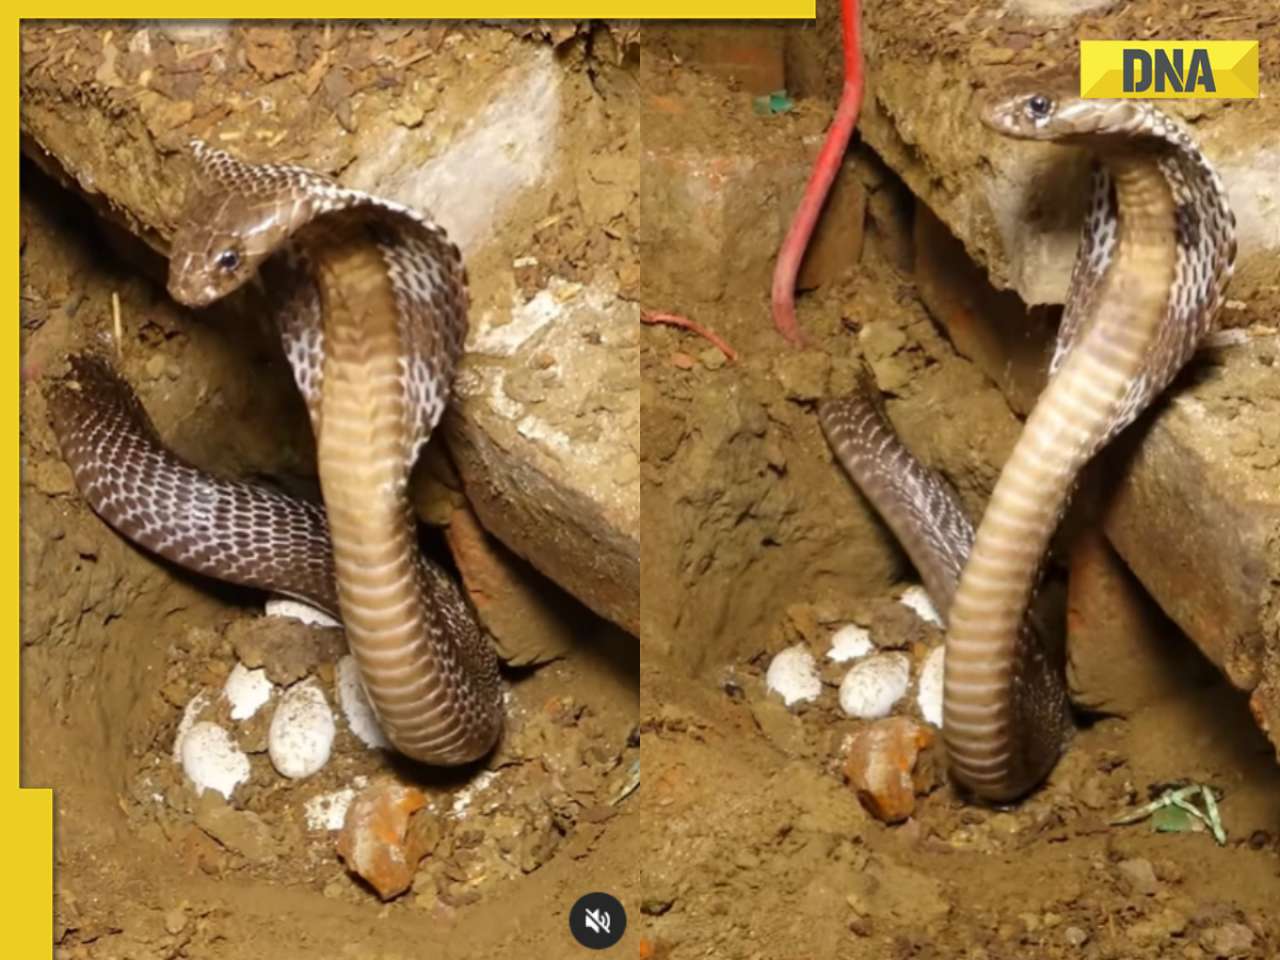 Video: Cobra mother's protective instincts go viral as she guards nest of eggs, watch